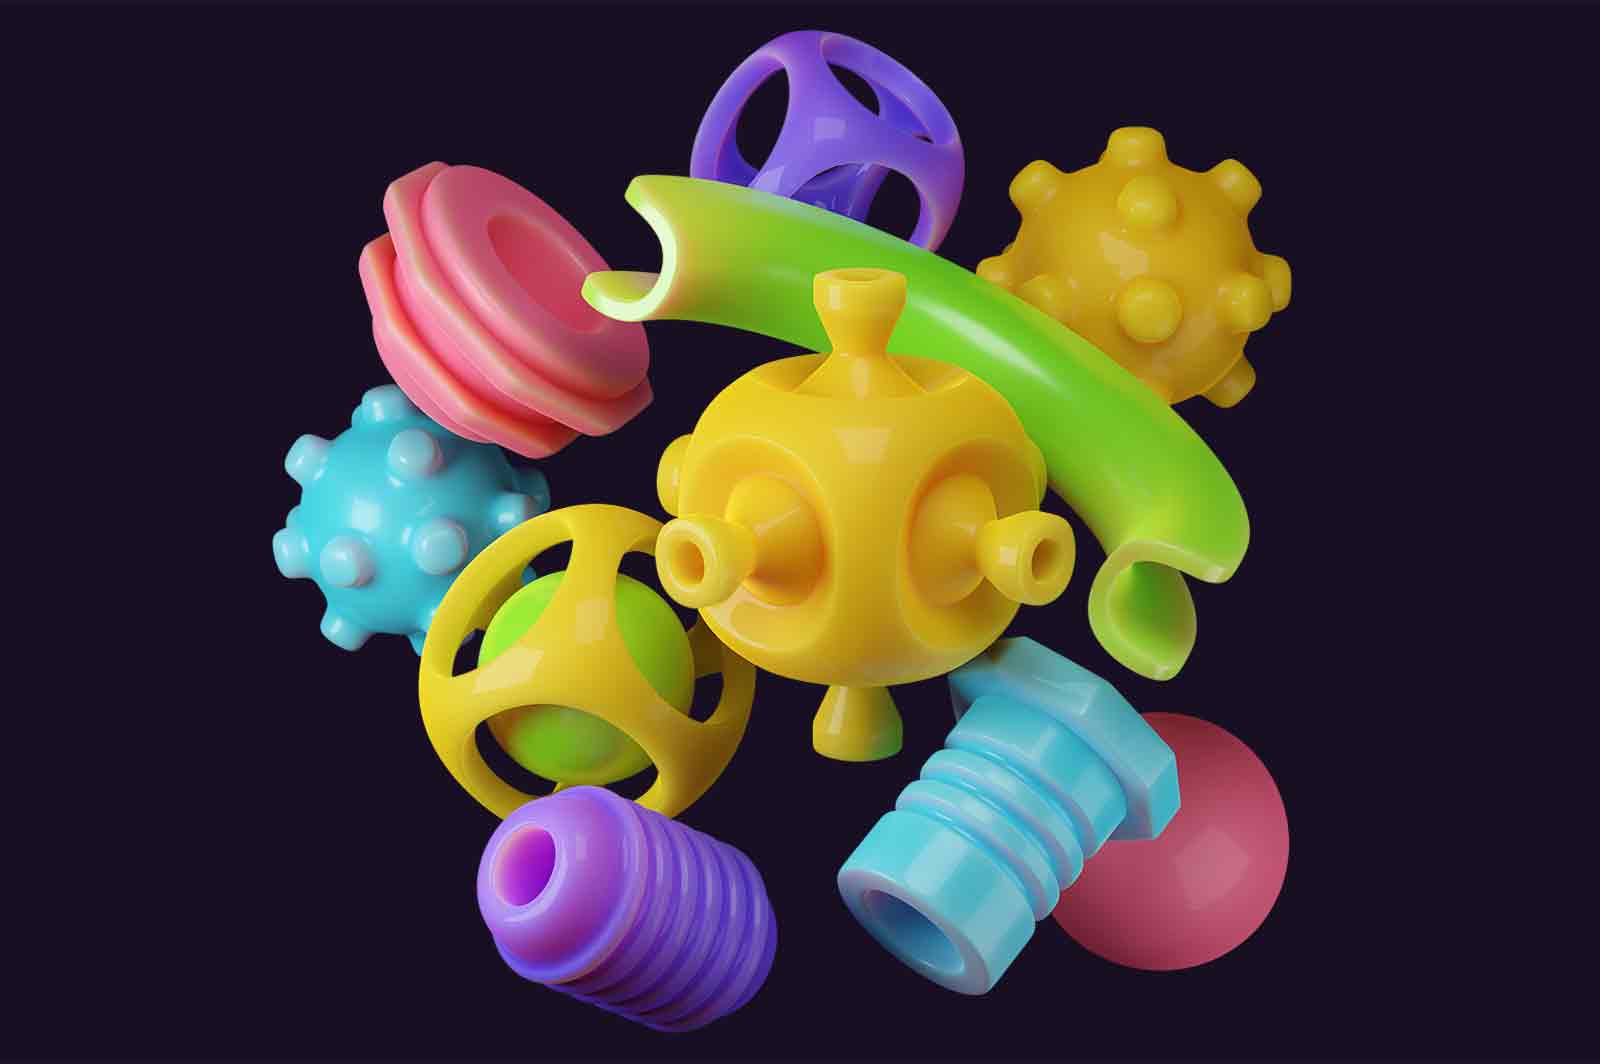 Abstract composition of colourful plastic details of different shapes 3d rendered illustration. Round shaped, gears pipes details. Components of mechanism concept